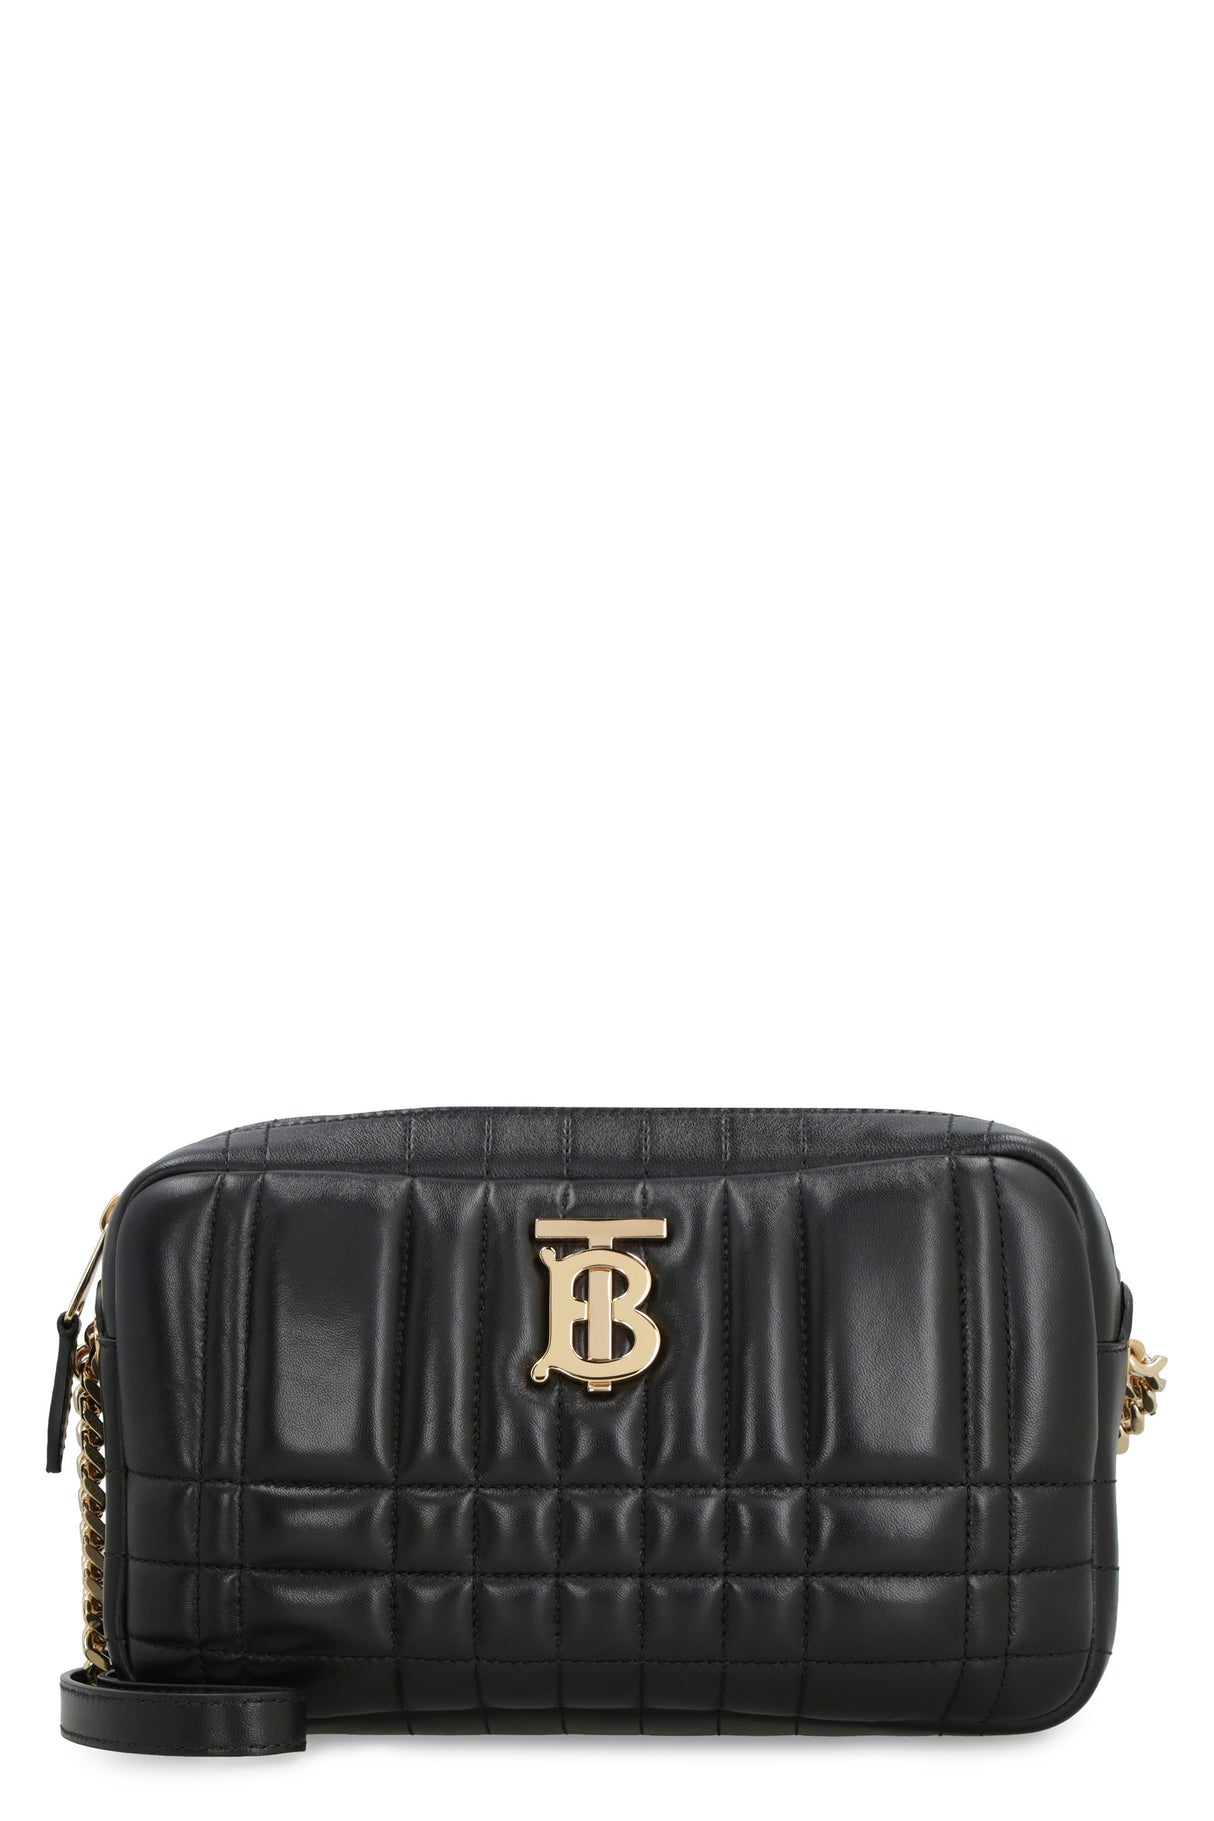 BURBERRY Black Quilted Lambskin Leather Mini Camera Bag with Gold Logo and Adjustable Chain Strap for Women - Lola Small